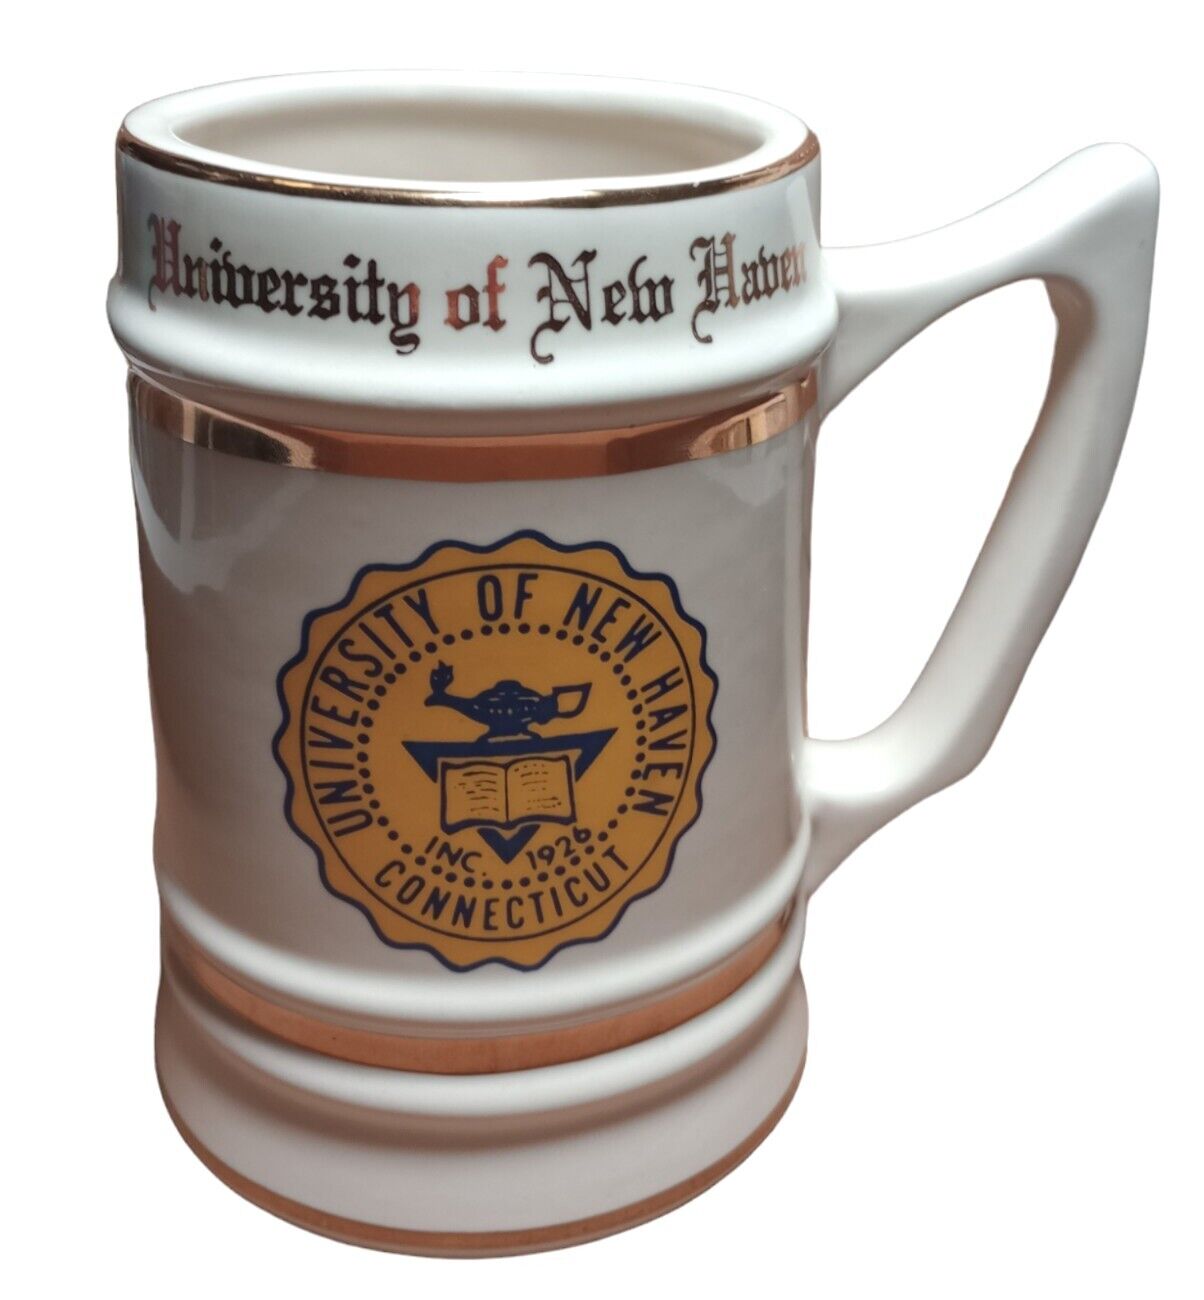 VINTAGE W.C. Bunting University Of New Haven Connecticut Inc 1926 Beer Stein Mug